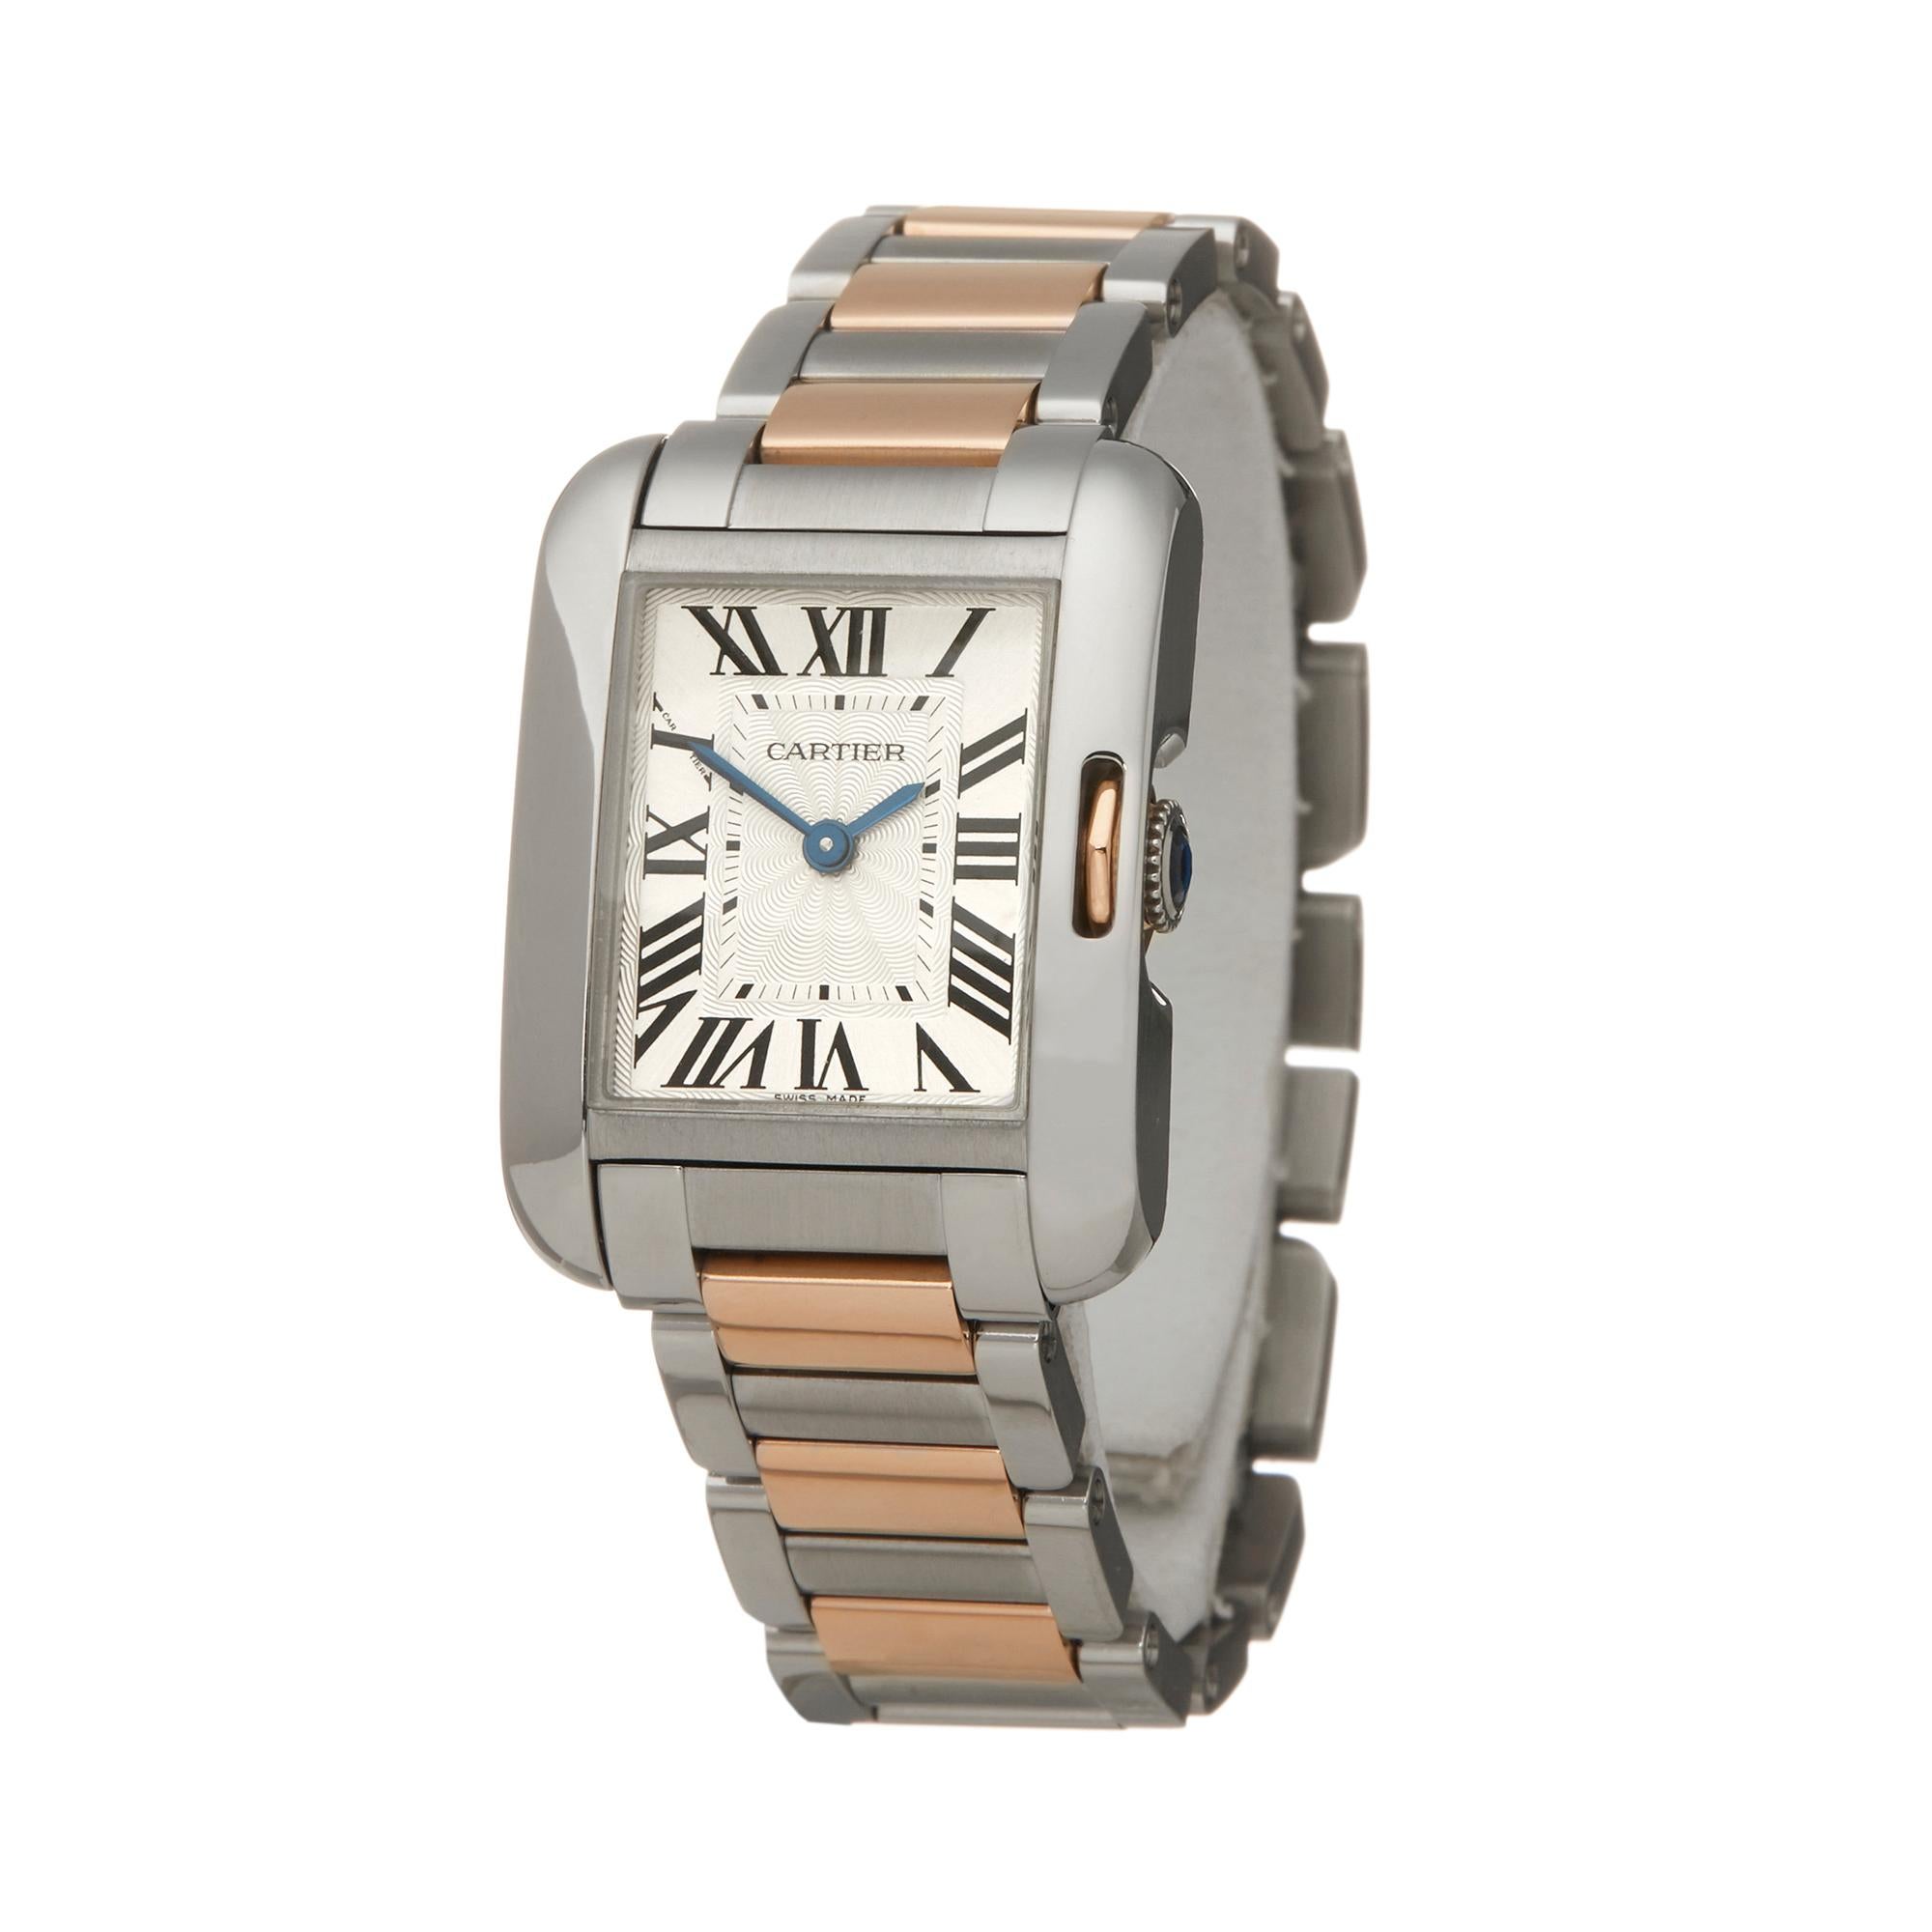 Ref: W6071
Manufacturer: Cartier
Model: Tank
Model Ref: W5310036 or 3485
Age: 1st November 2013
Gender: Ladies
Complete With: Box, Manuals & Guarantee
Dial: Silver Roman
Glass: Sapphire Crystal
Movement: Quartz
Water Resistance: To Manufacturers